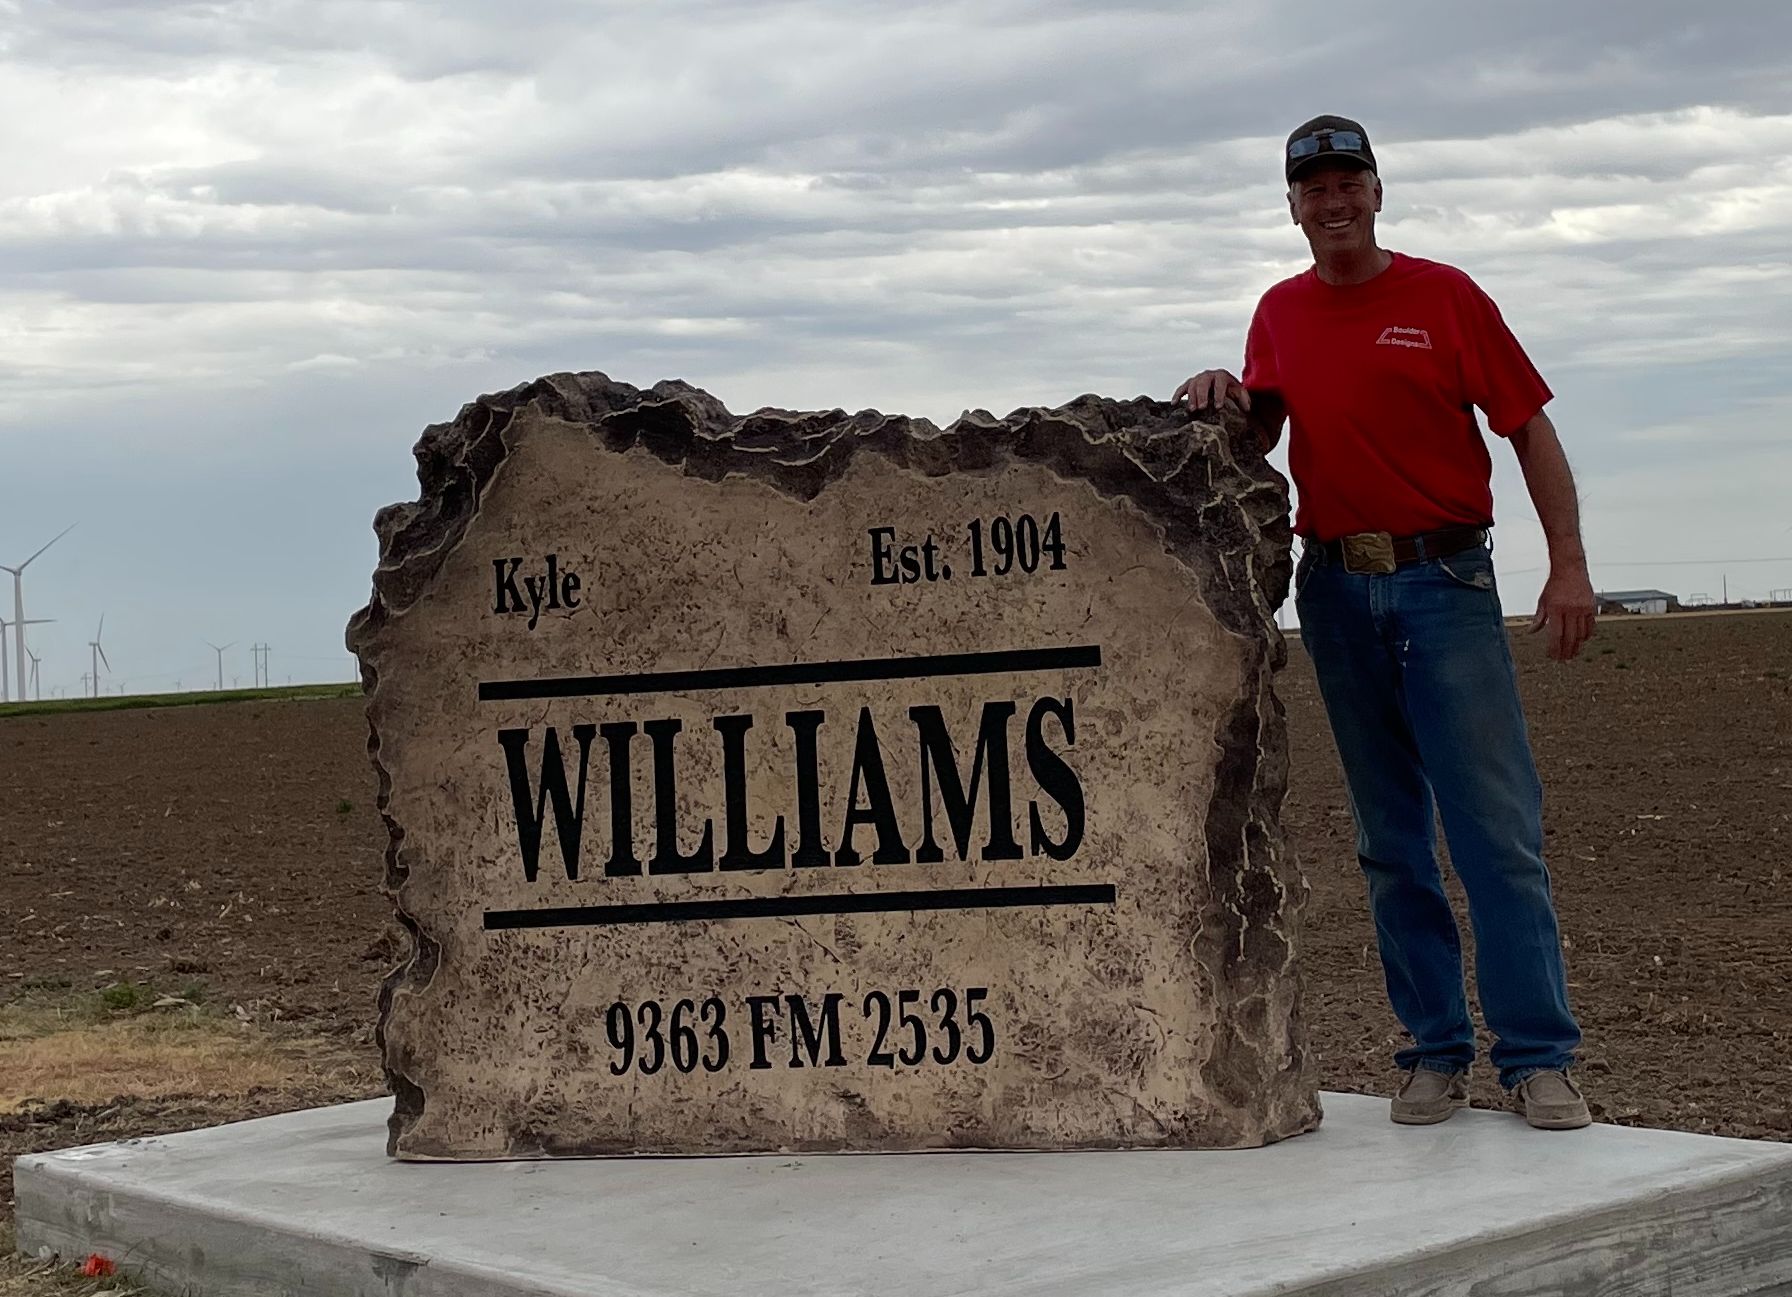 A man in a red shirt stands in front of a williams sign